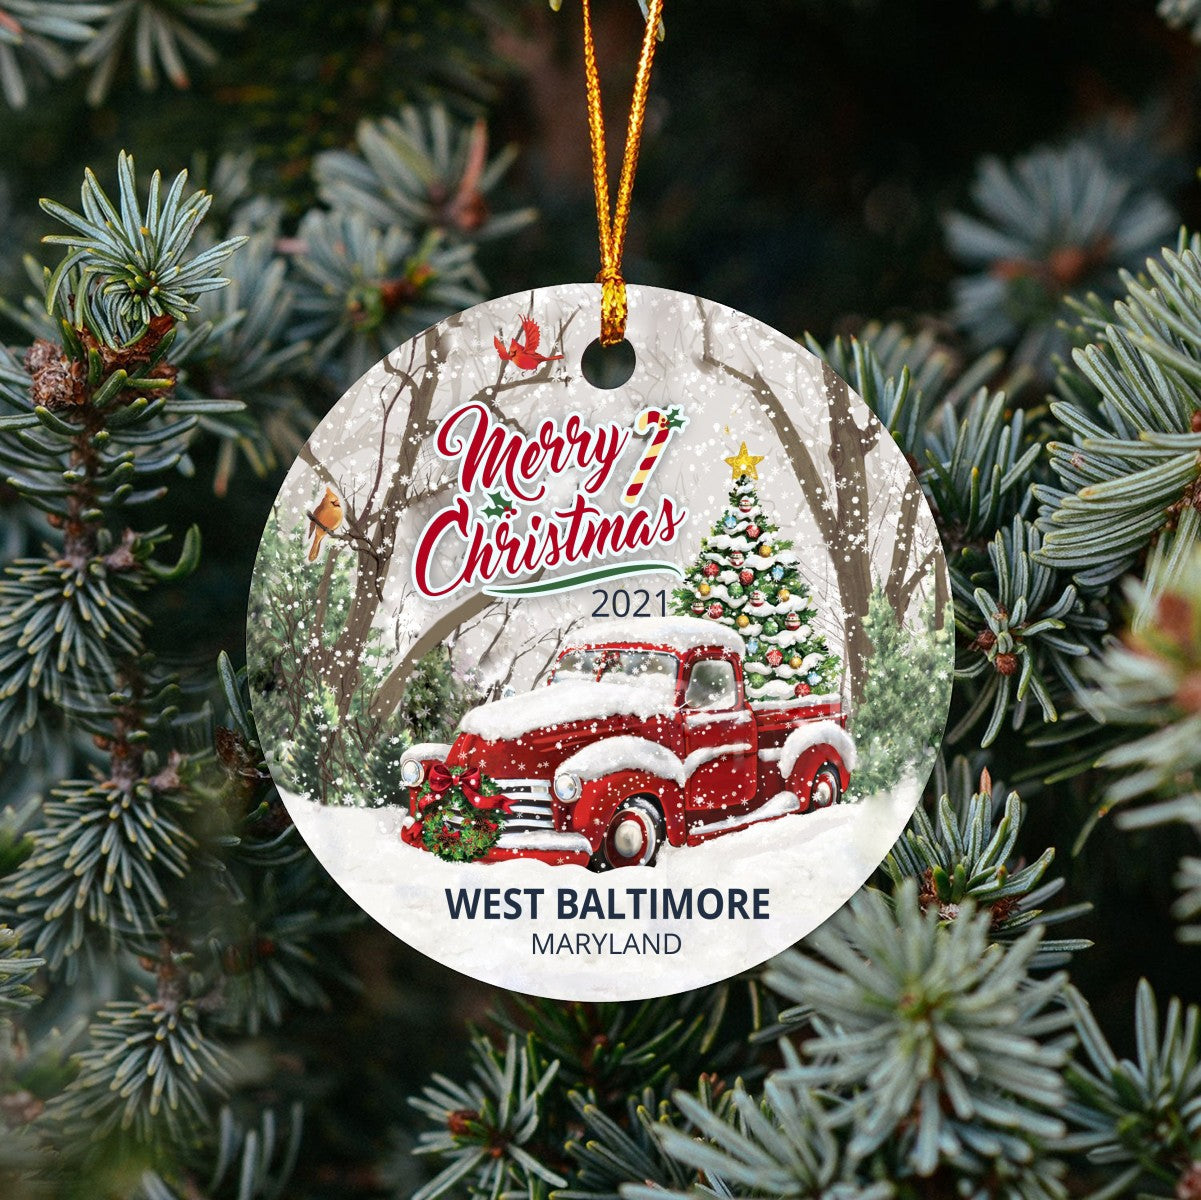 Christmas Tree Ornaments West Baltimore - Ornament With Name City, State West Baltimore Maryland MD Ornament - Red Truck Xmas Ornaments 3'' Plastic Gift For Family, Friend And Housewarming